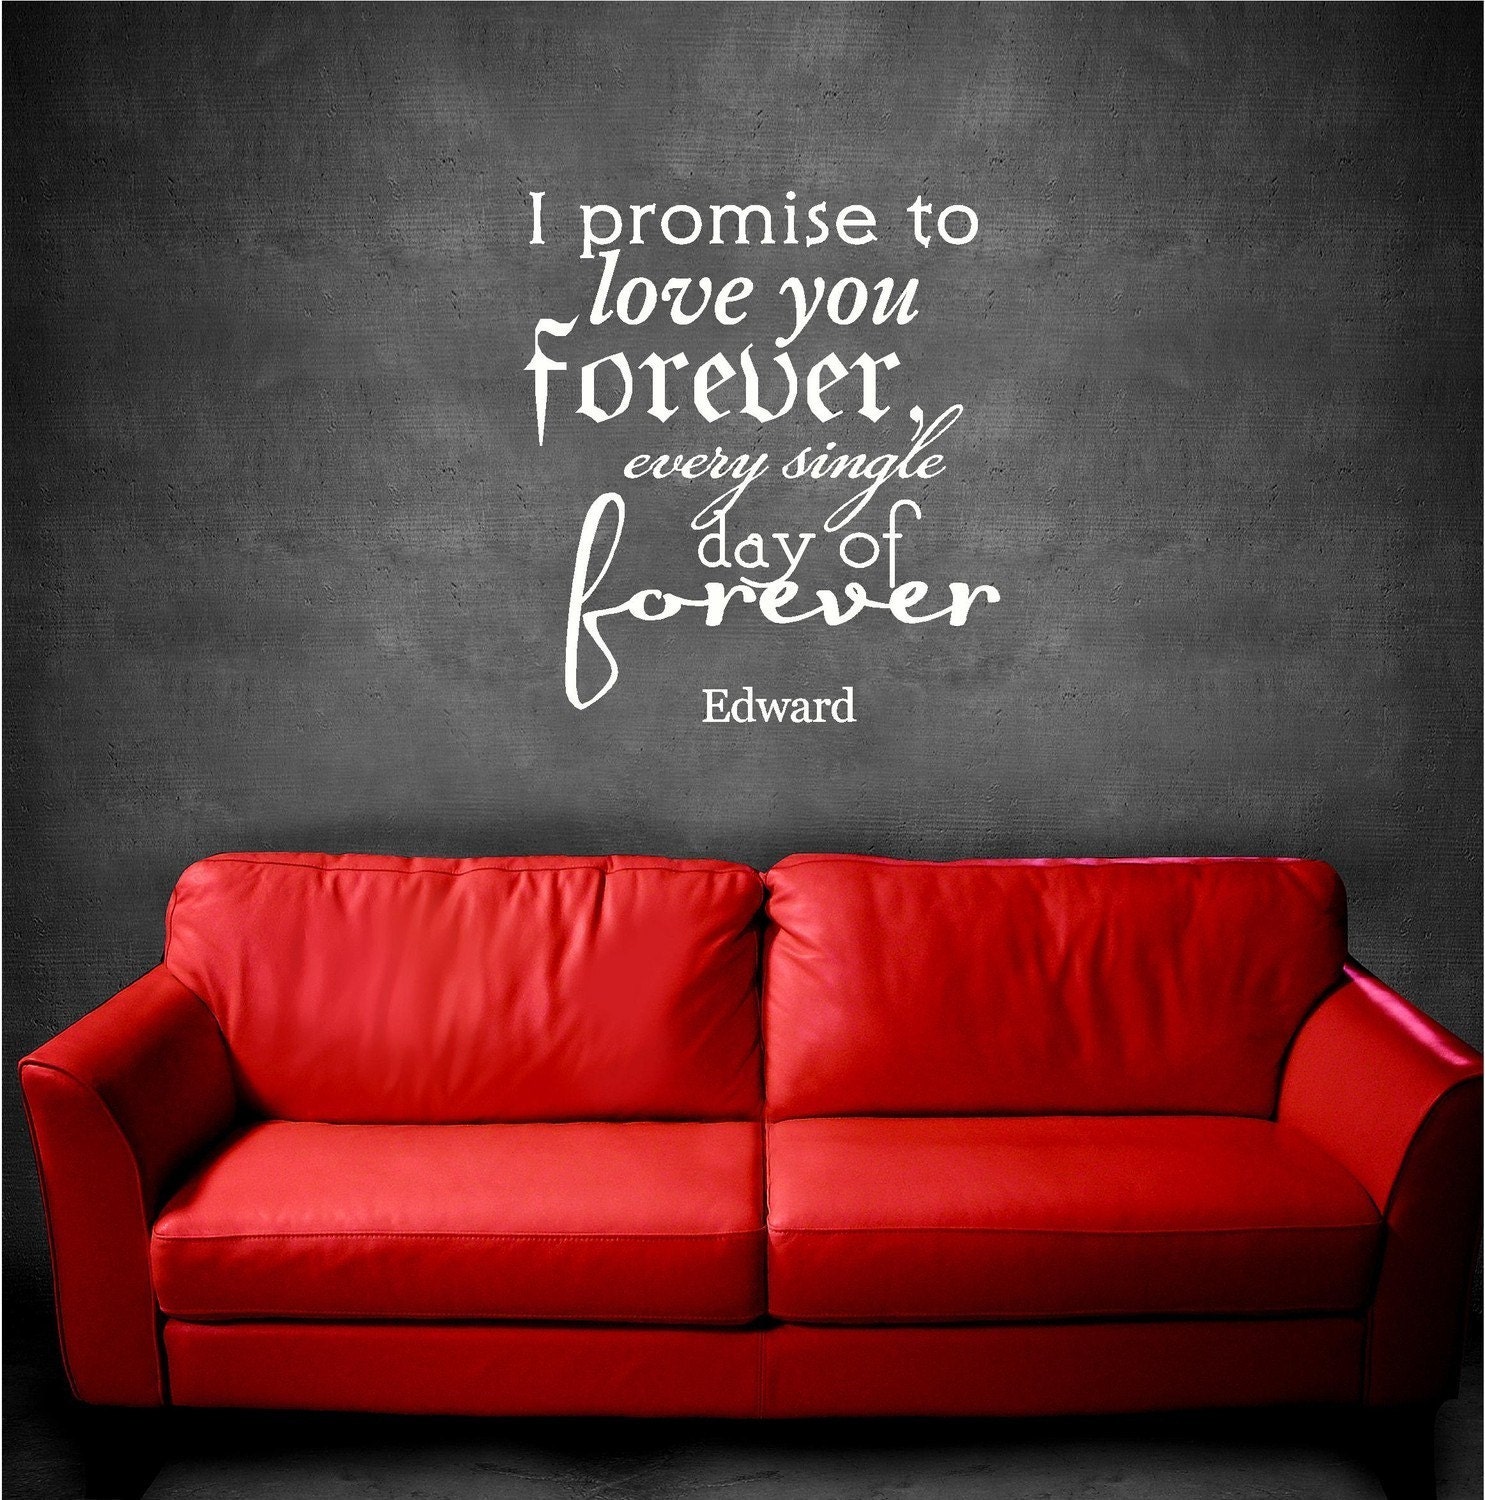 searching for love quotes. i promise to love you forever